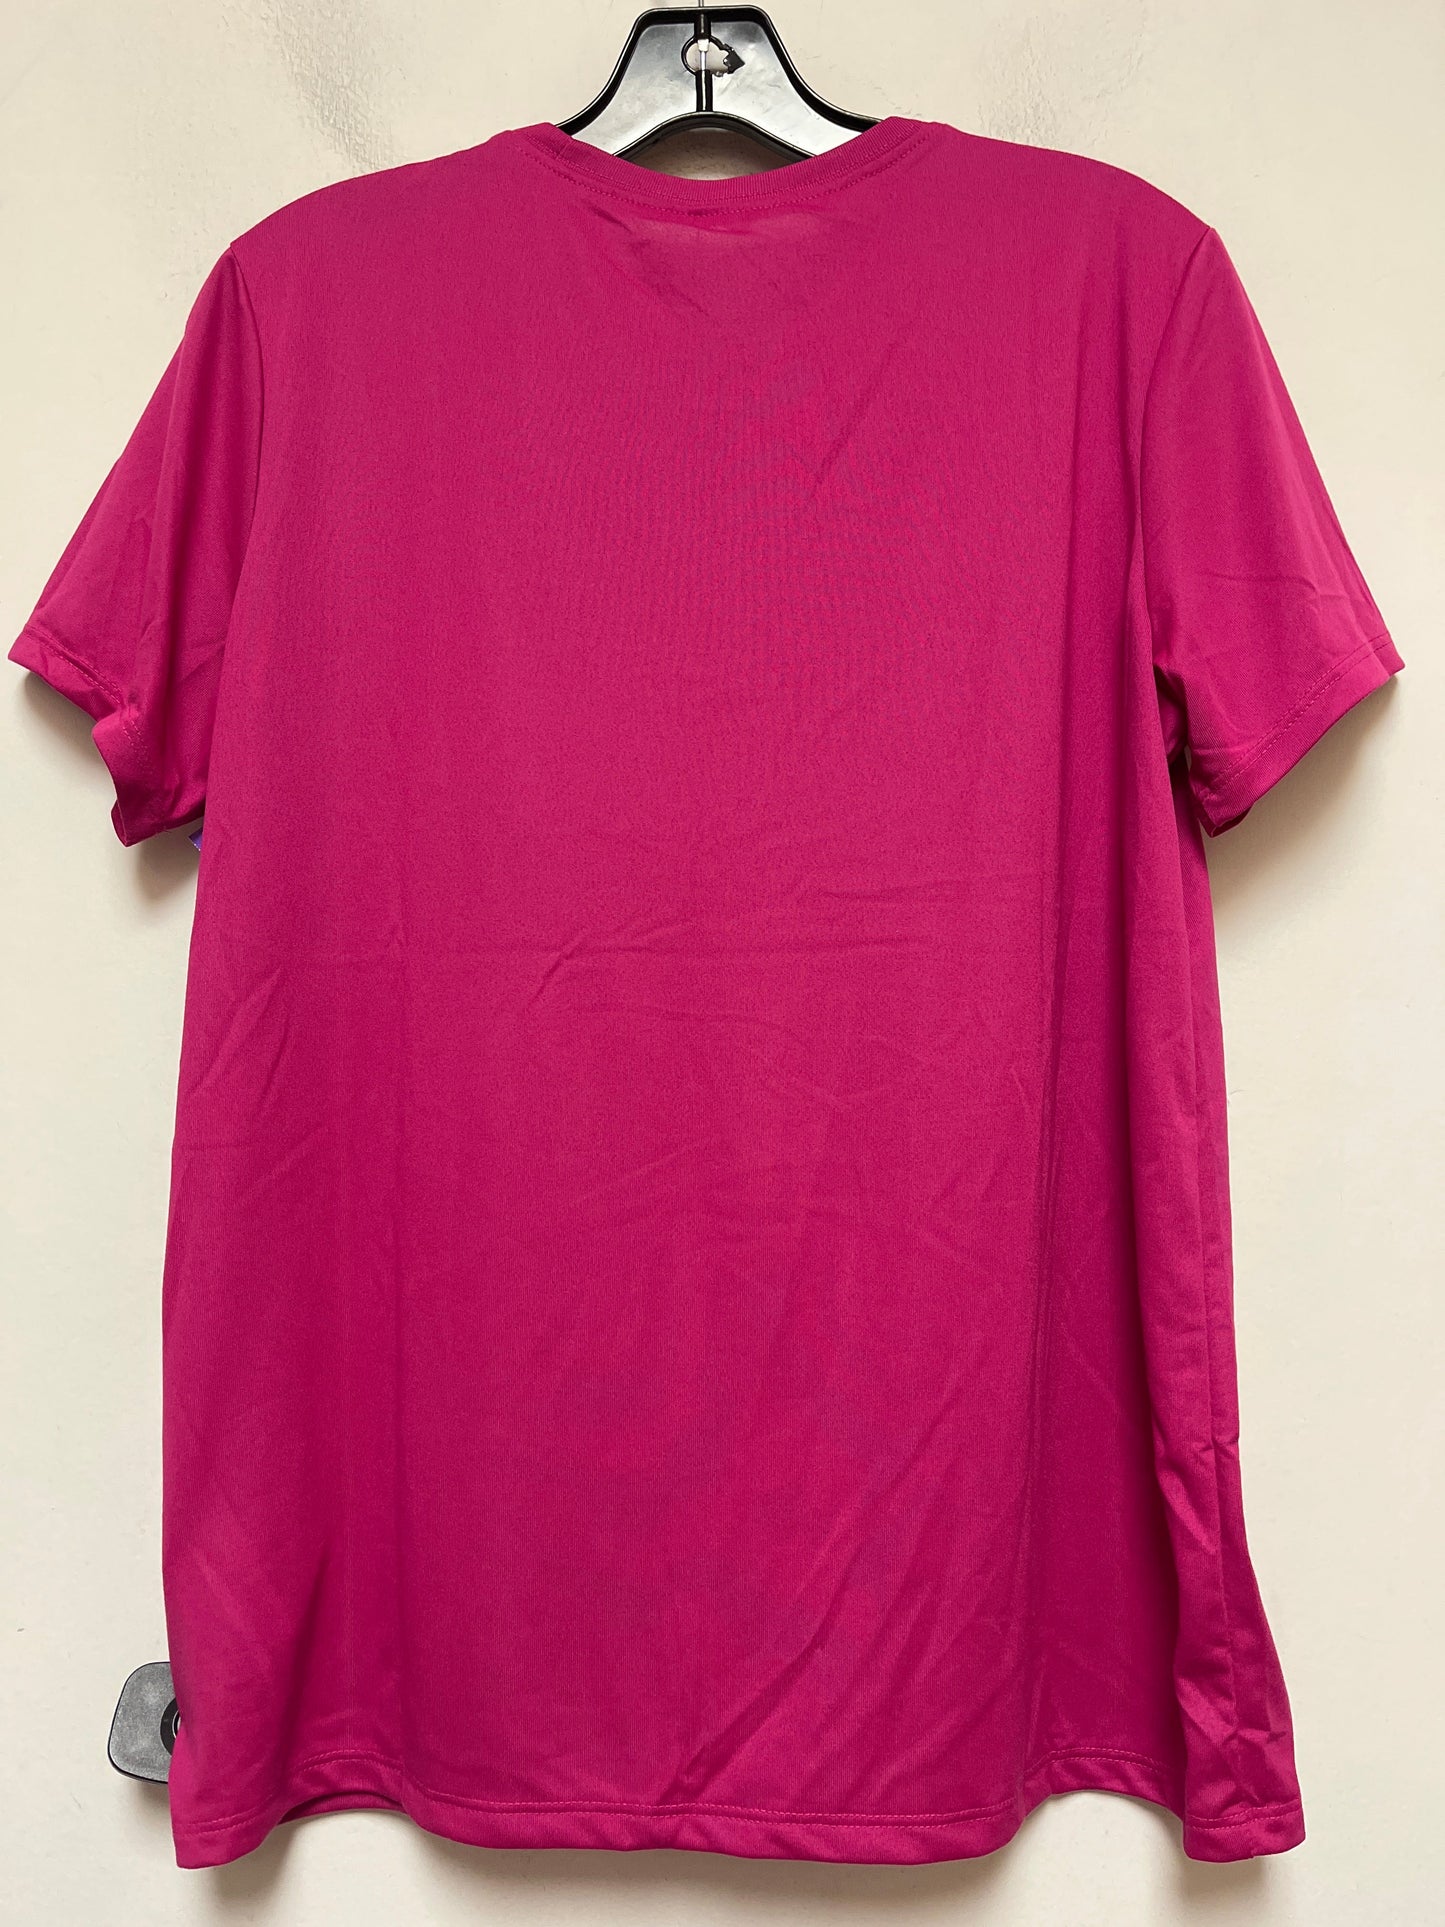 Pink Athletic Top Short Sleeve Nike Apparel, Size M